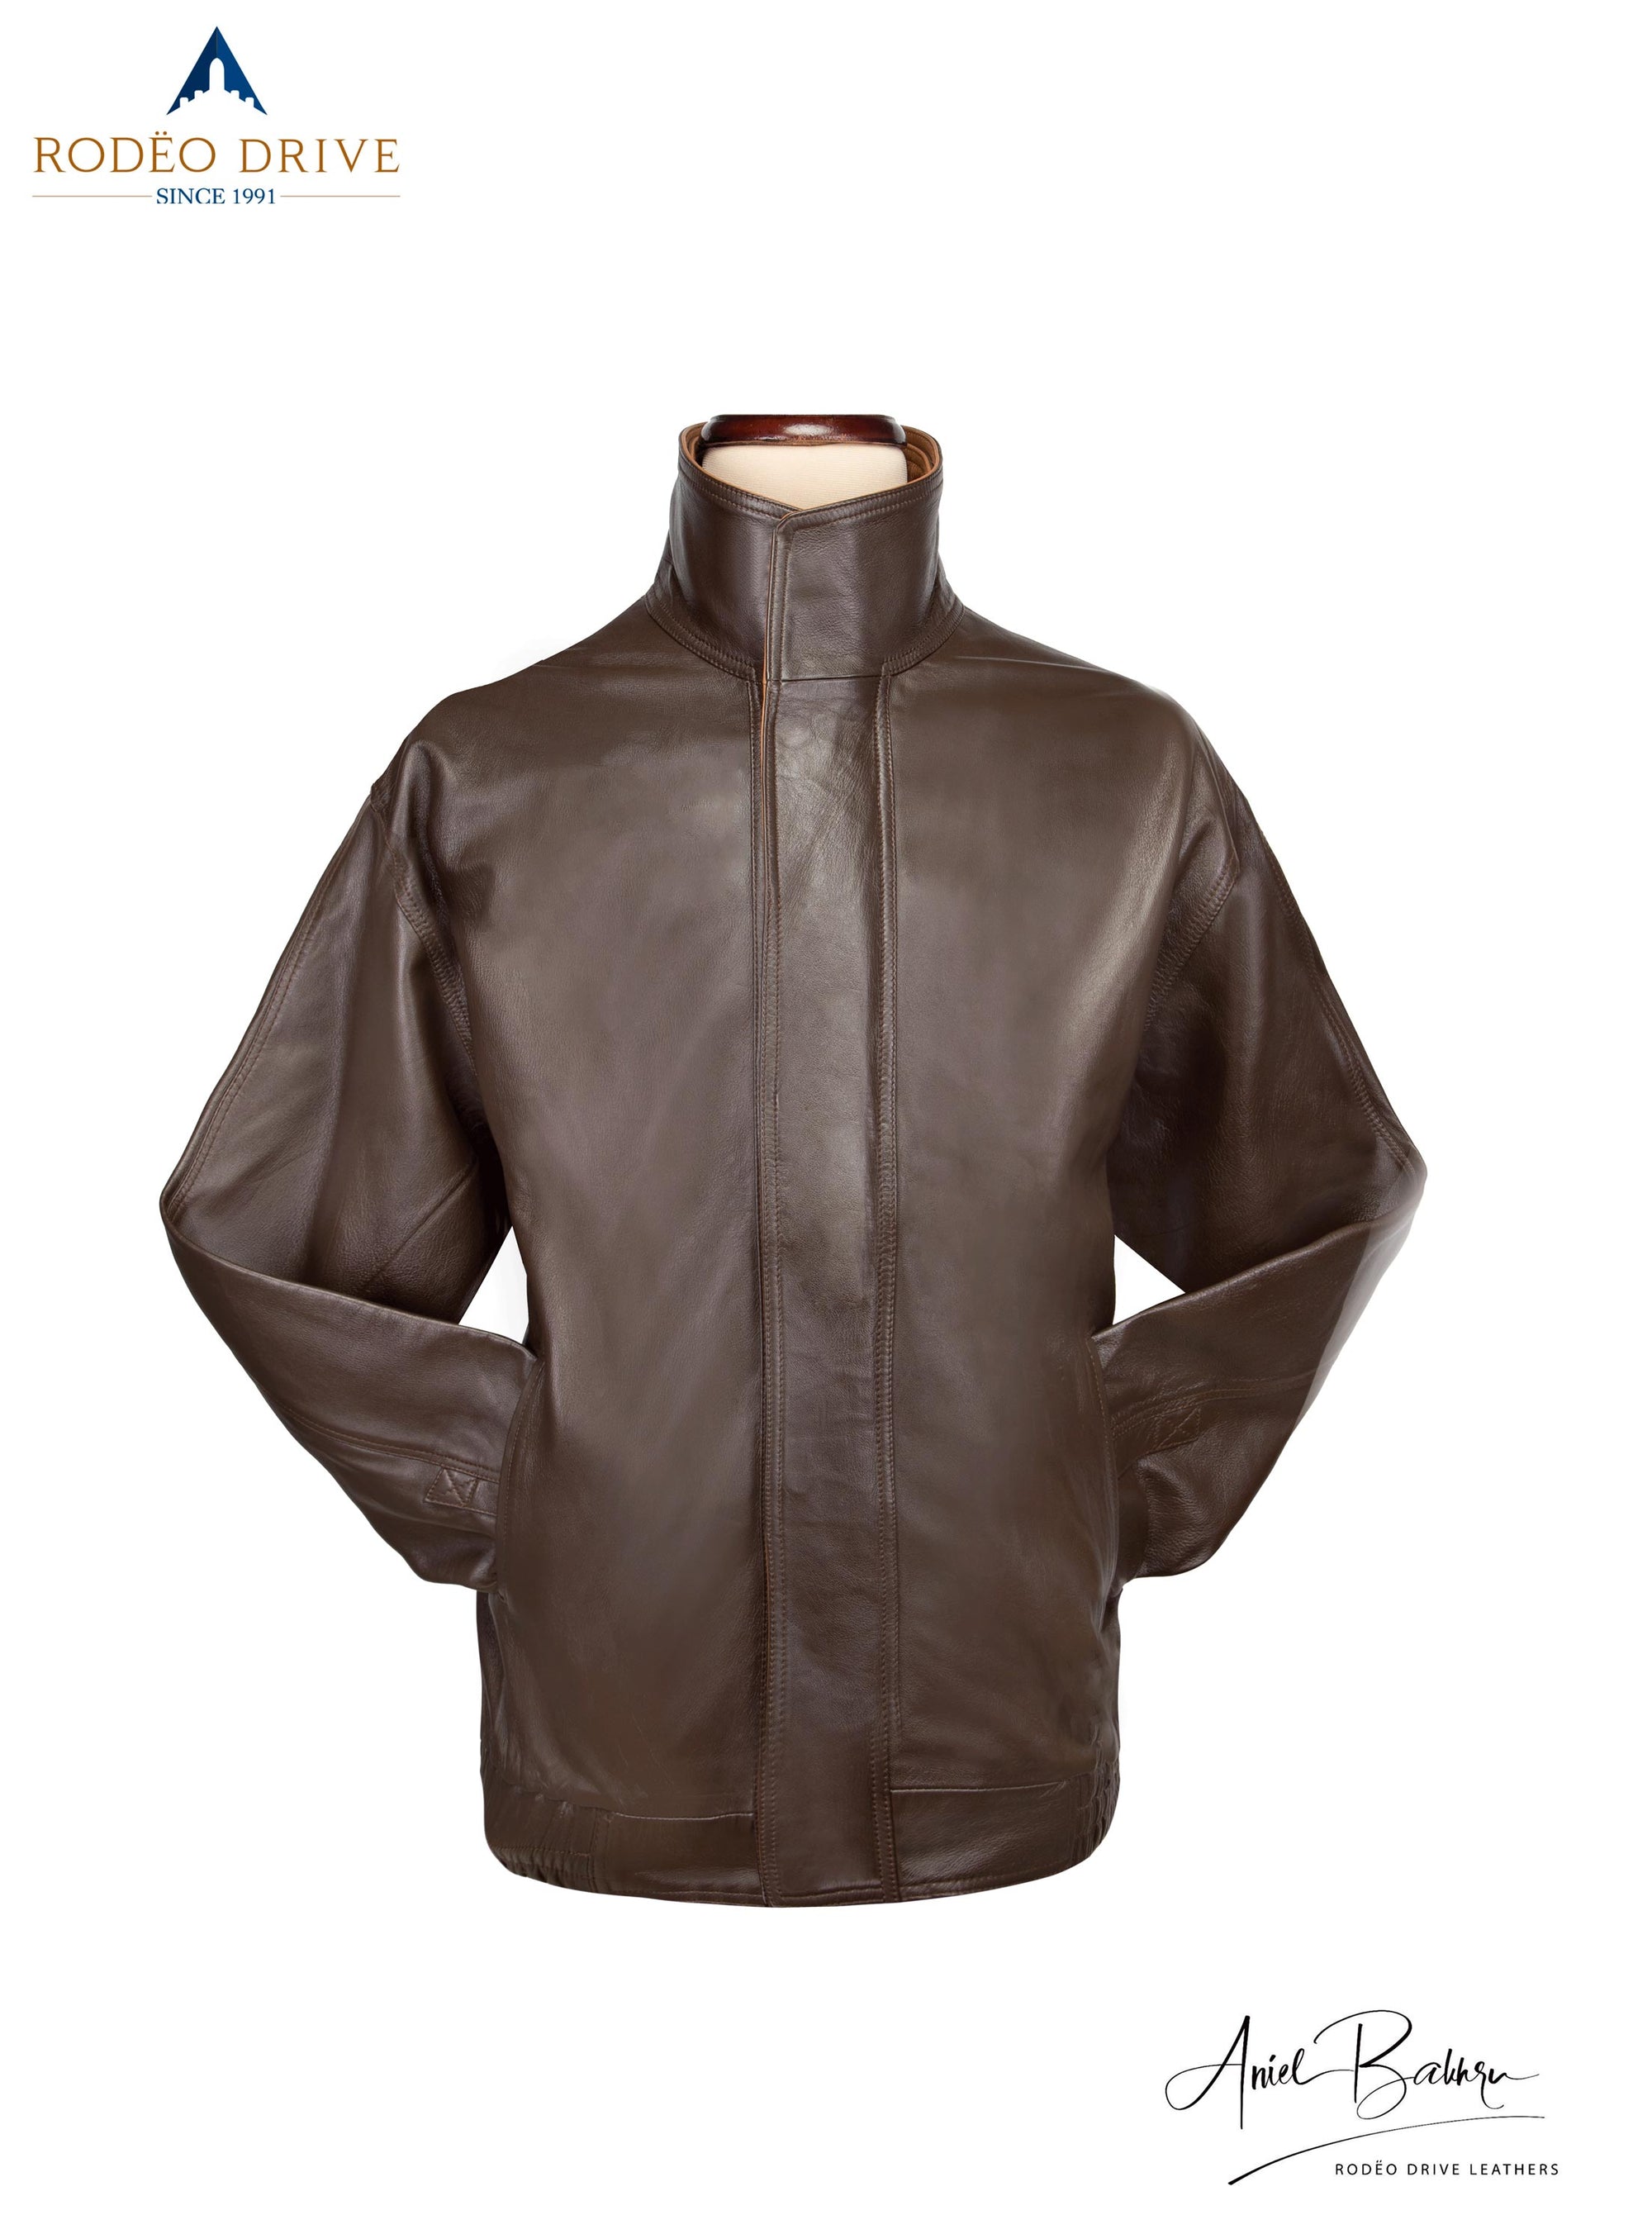 Image of 1 Color Bomber Jacket . Front view. Turtle neck visible.